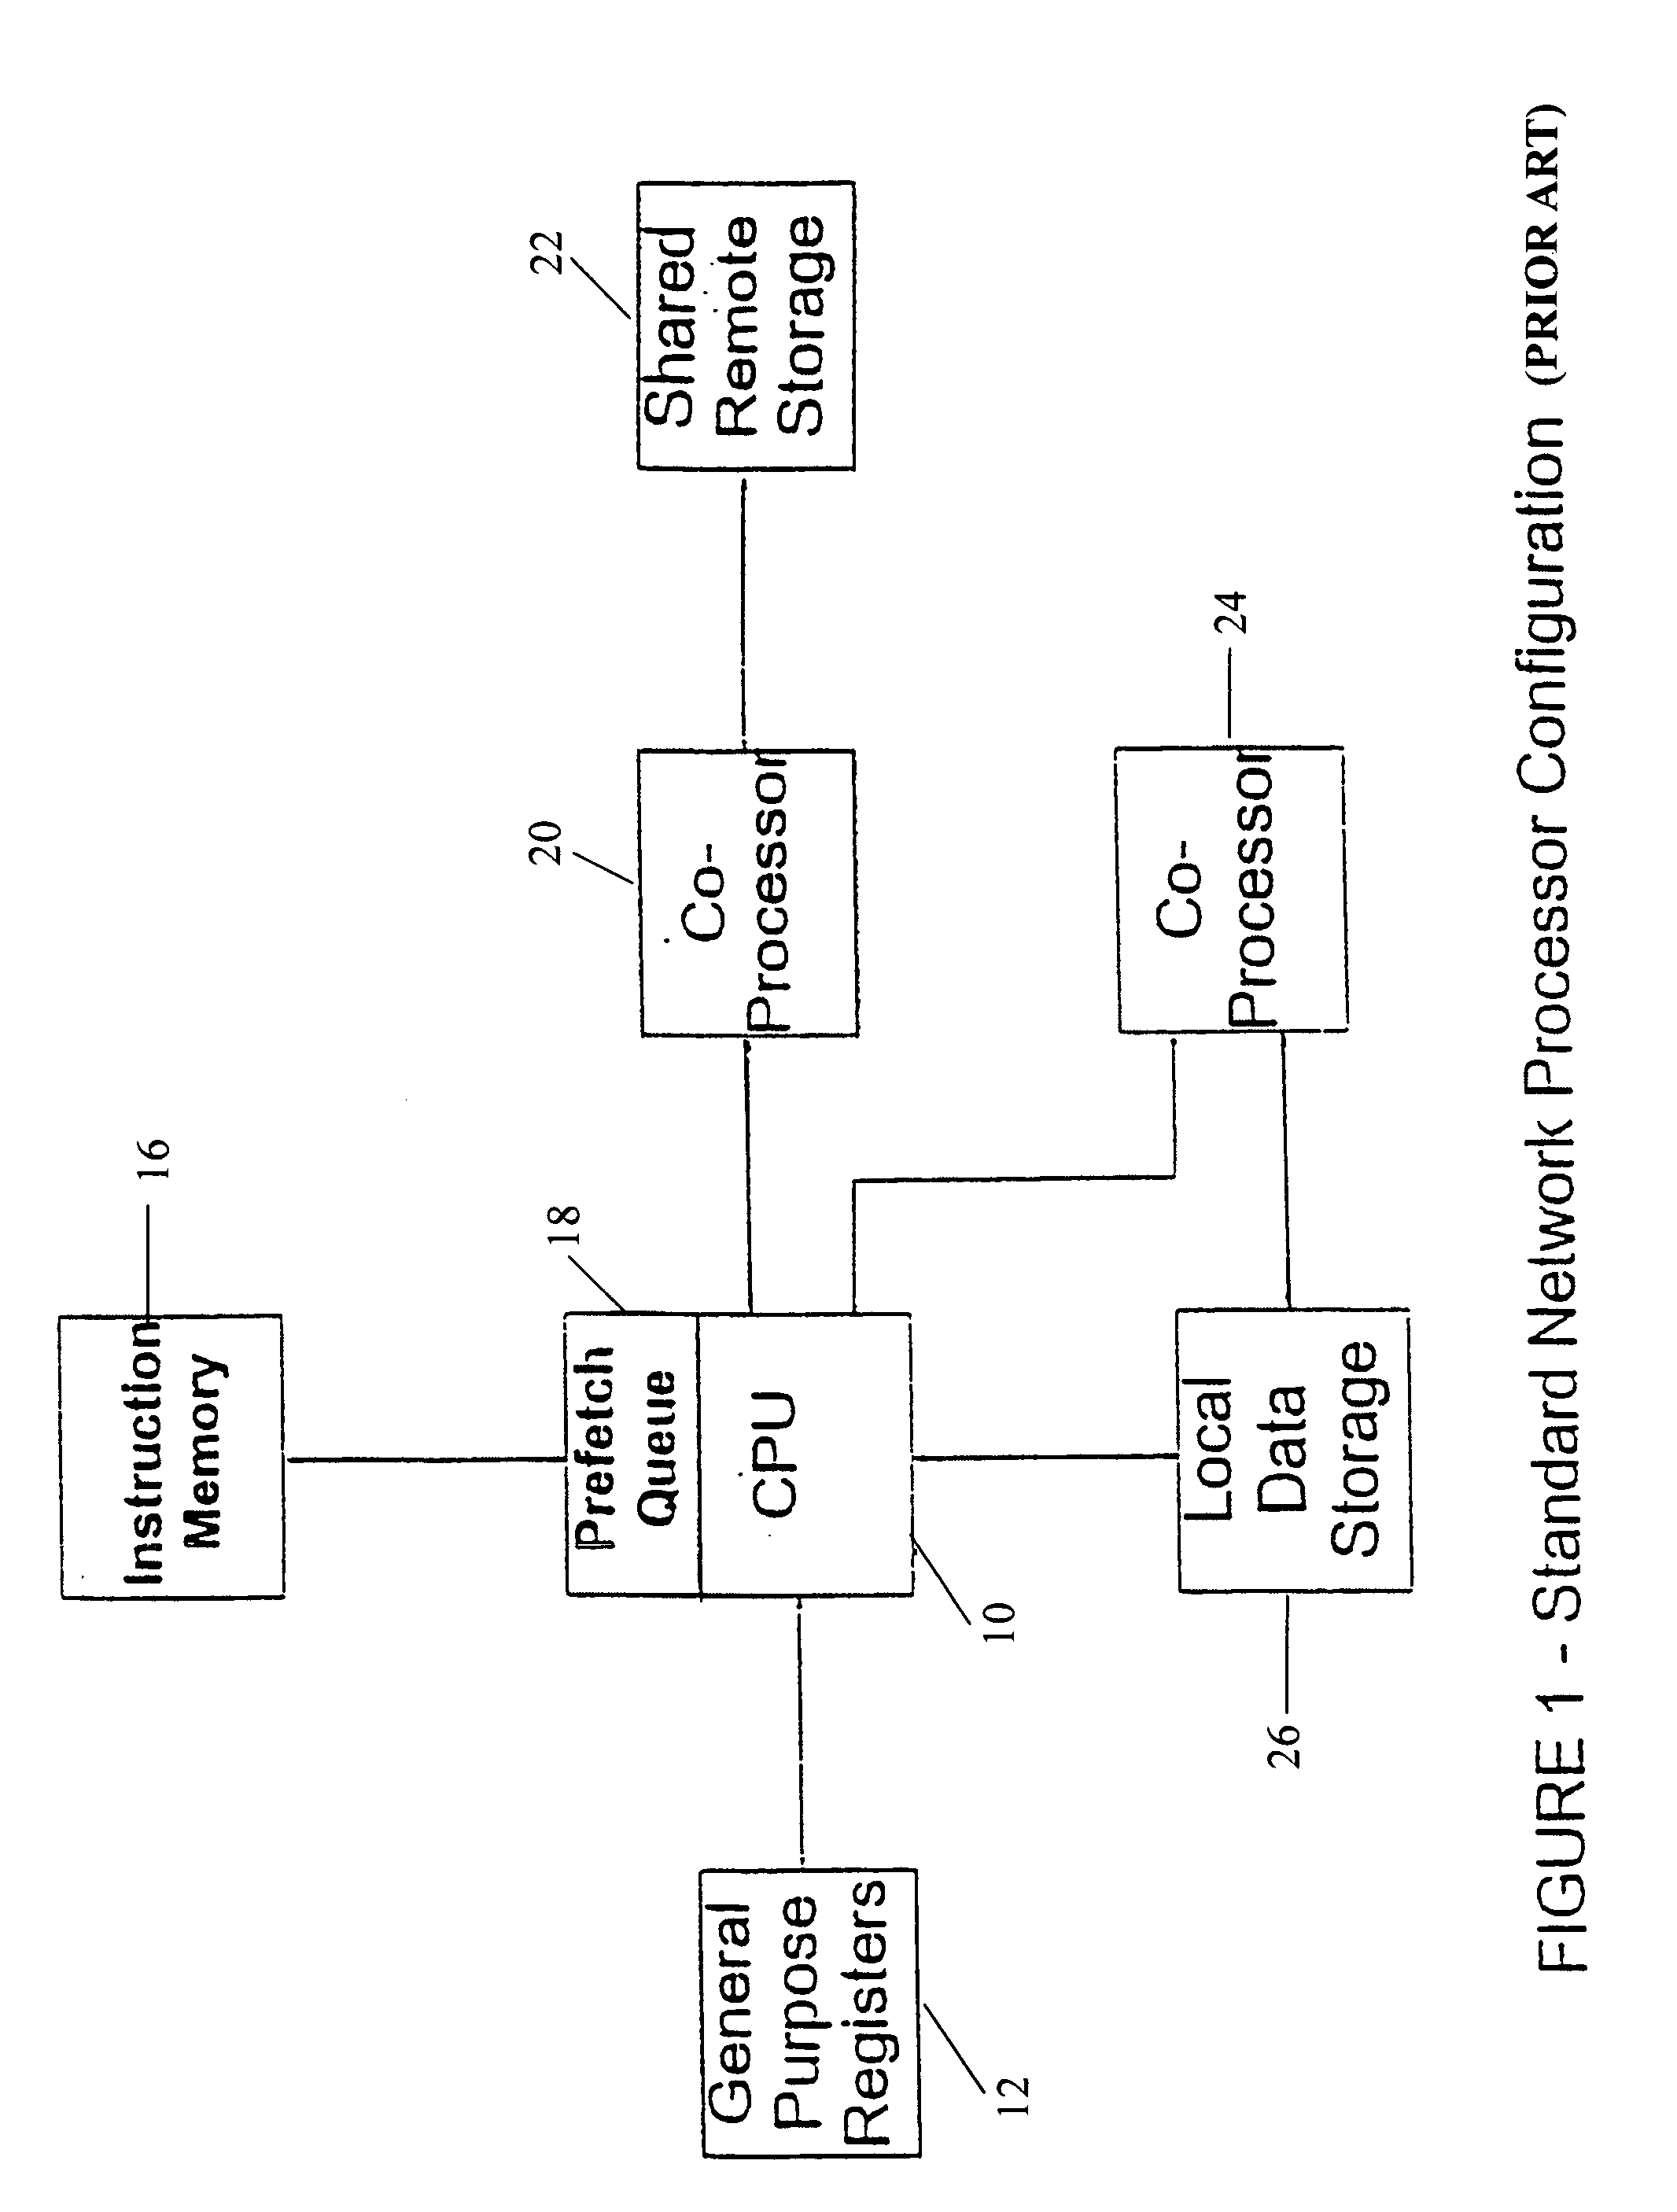 Network processor which makes thread execution control decisions based on latency event lengths